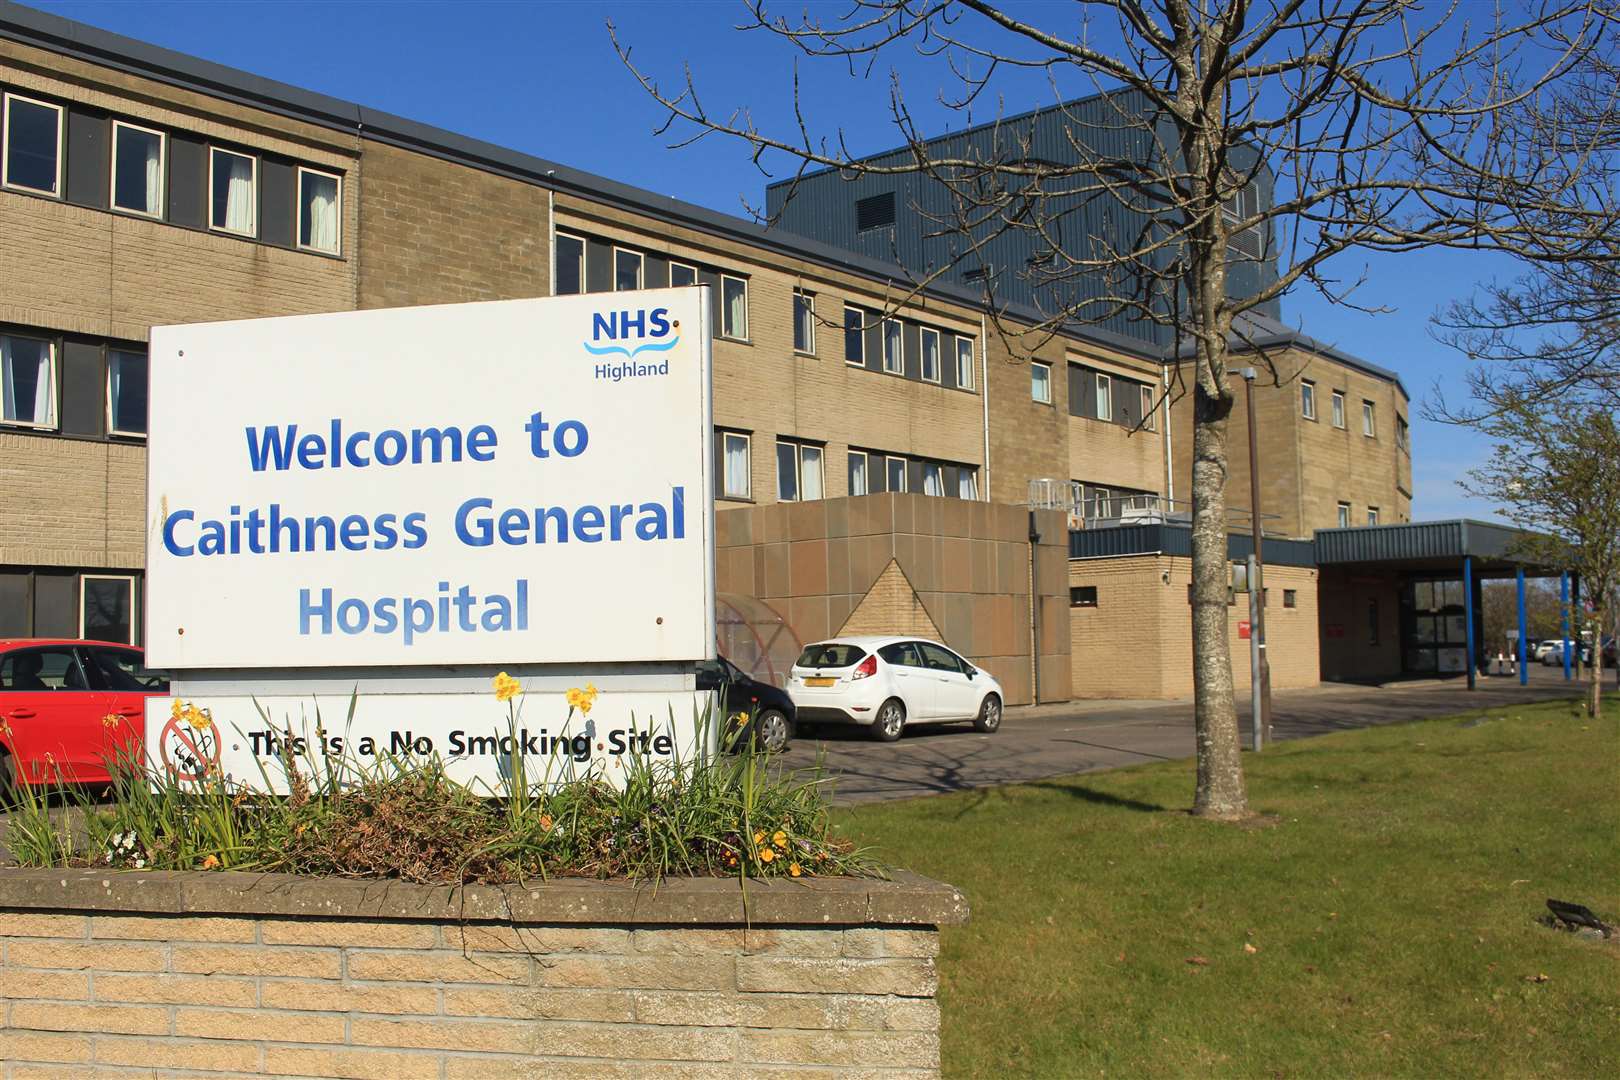 Only eight babies were born at Caithness General Hospital last year.